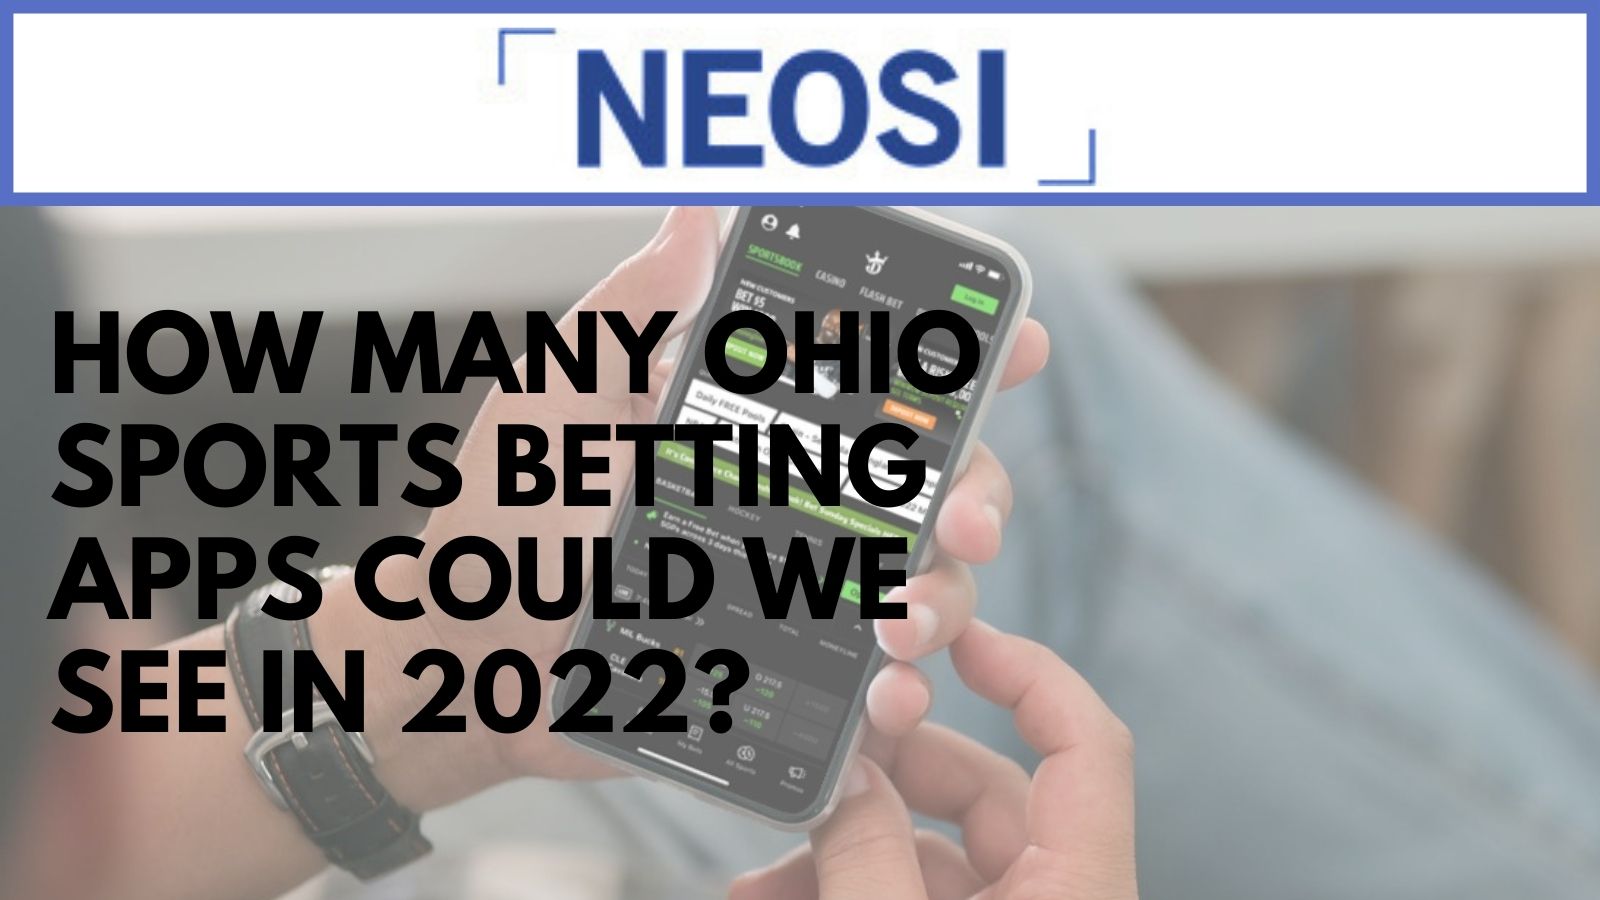 How Many Ohio Sports Betting Apps Could We See In 2022?